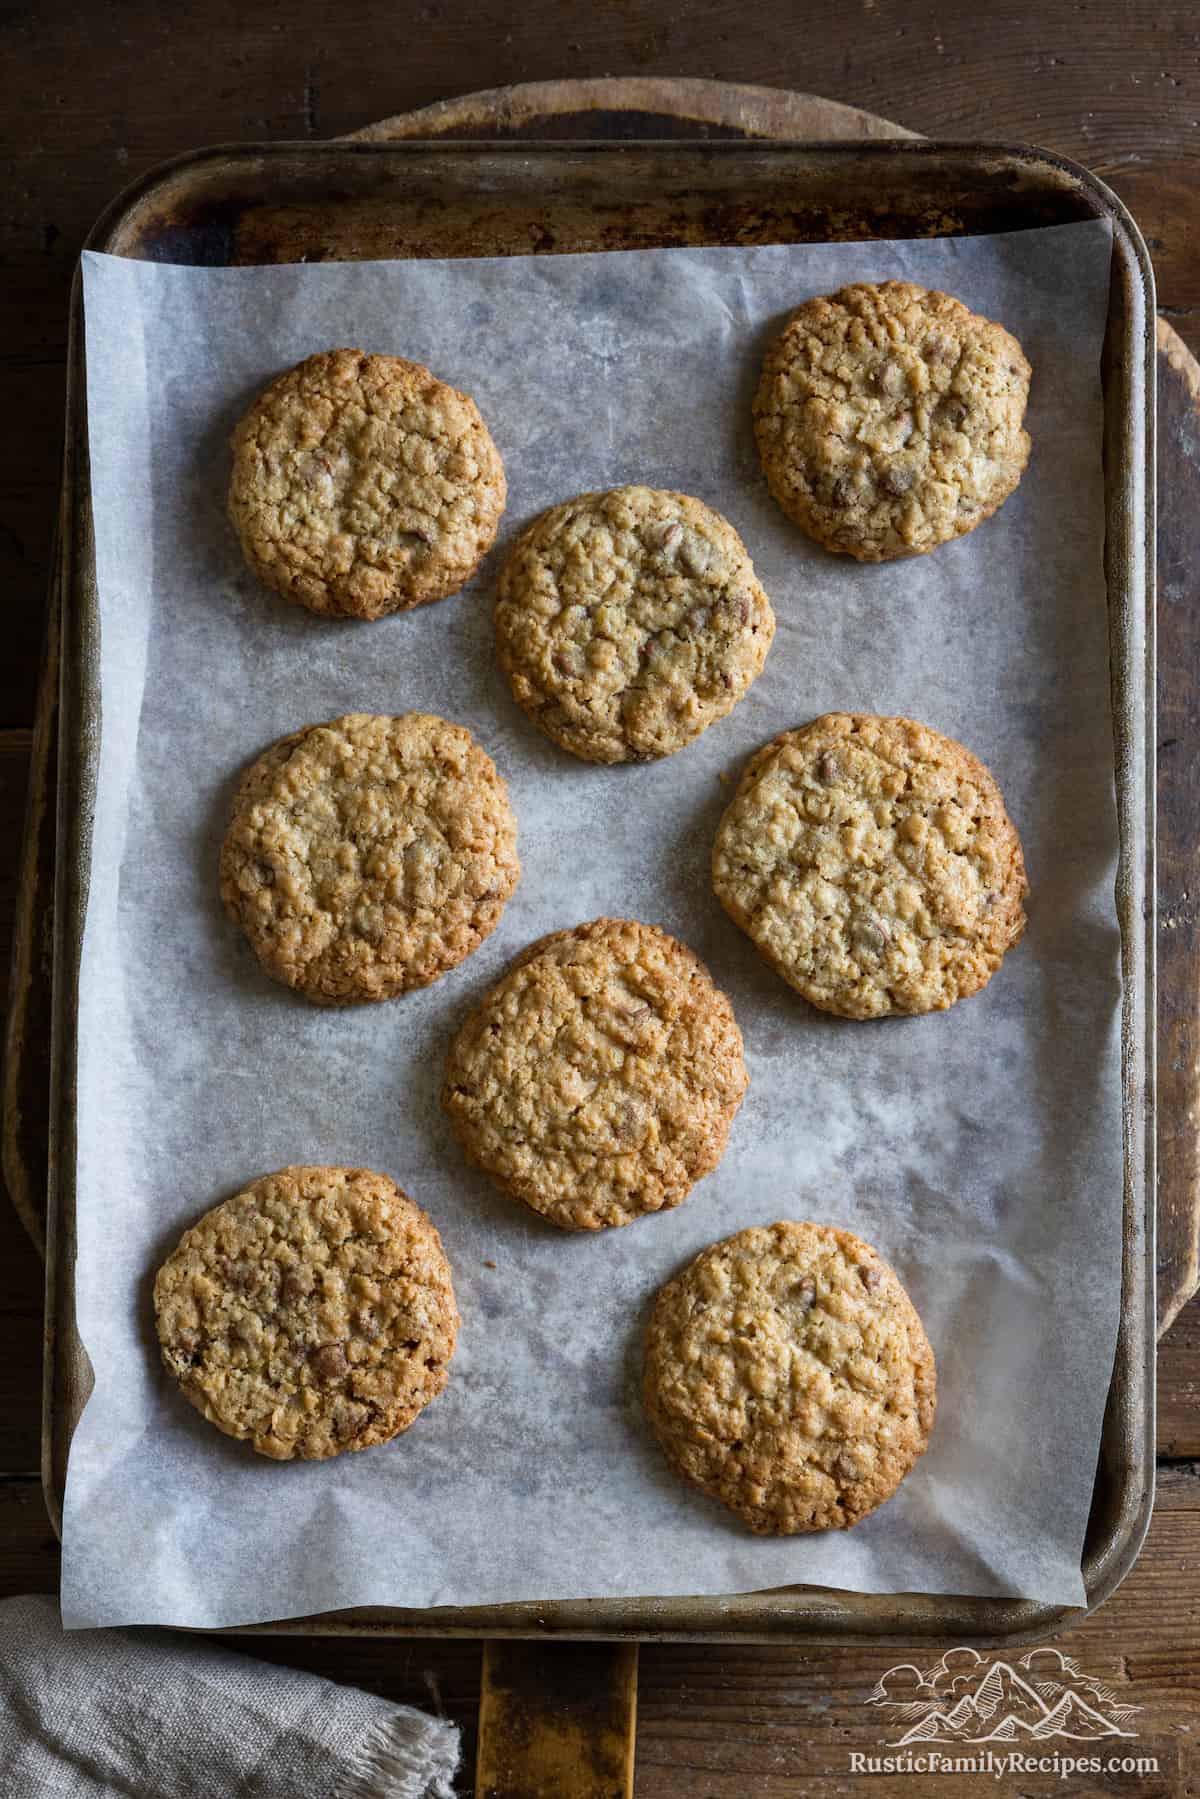 Freshly baked cookies on a baking sheet lined with parchment paper